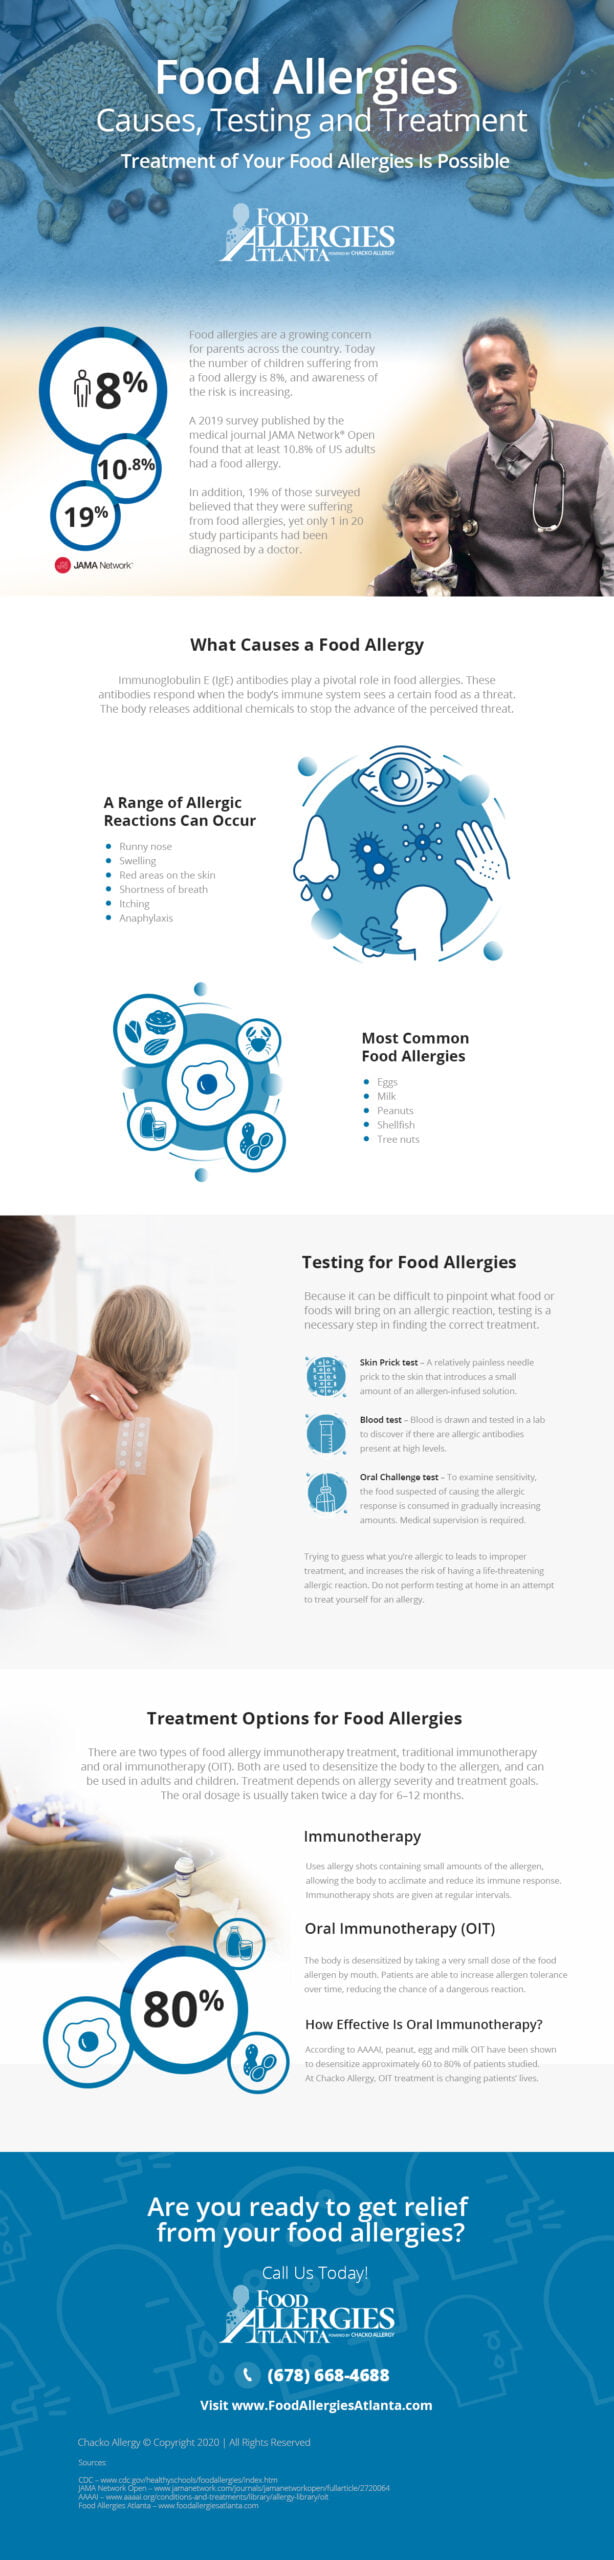 Food allergies causes, testing and treatment infographic